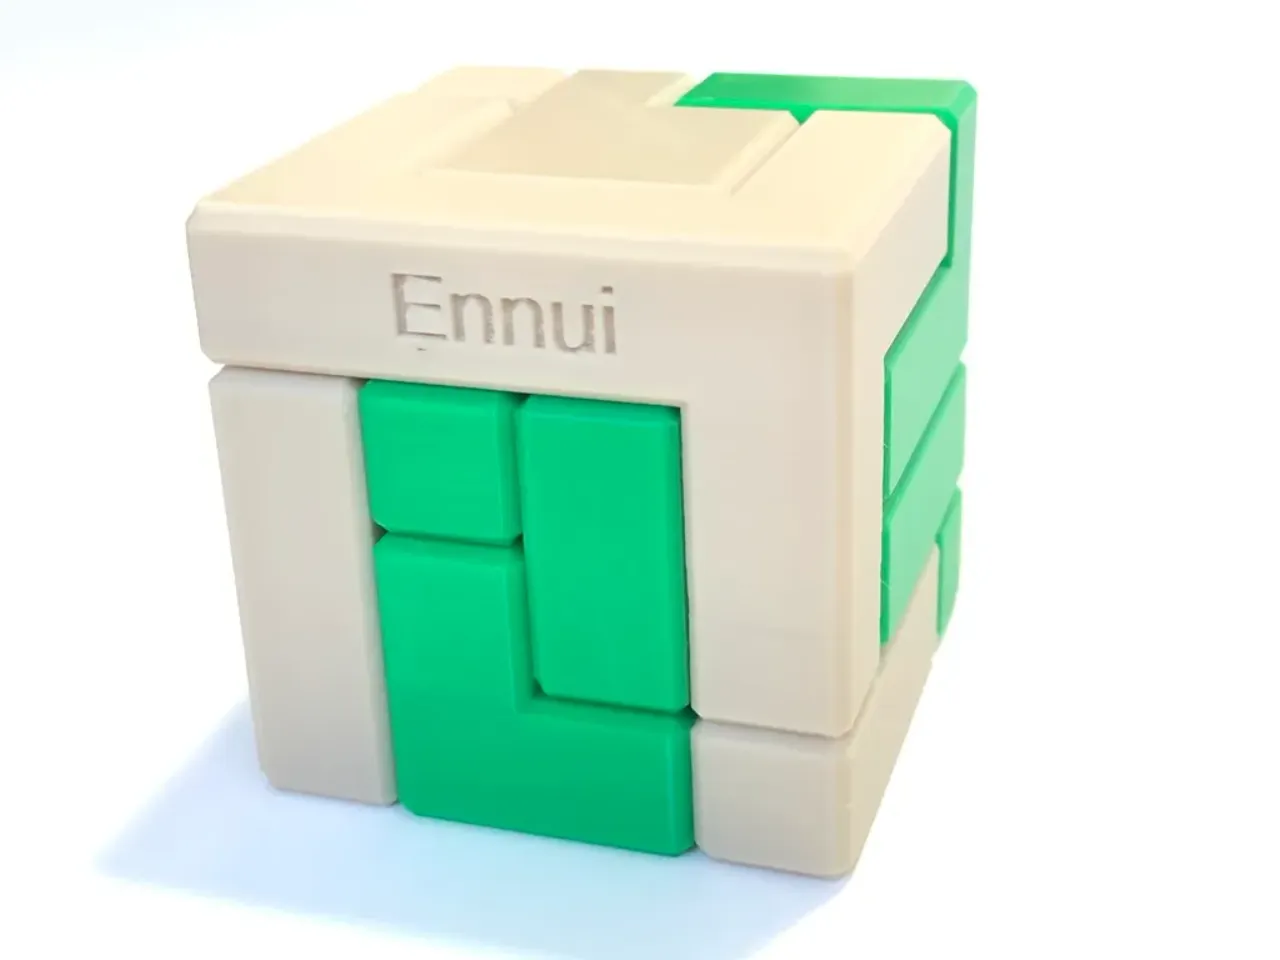 Ennui - Interlocking puzzle by László by Project model Molnár free STL Puzzle Download | Printable